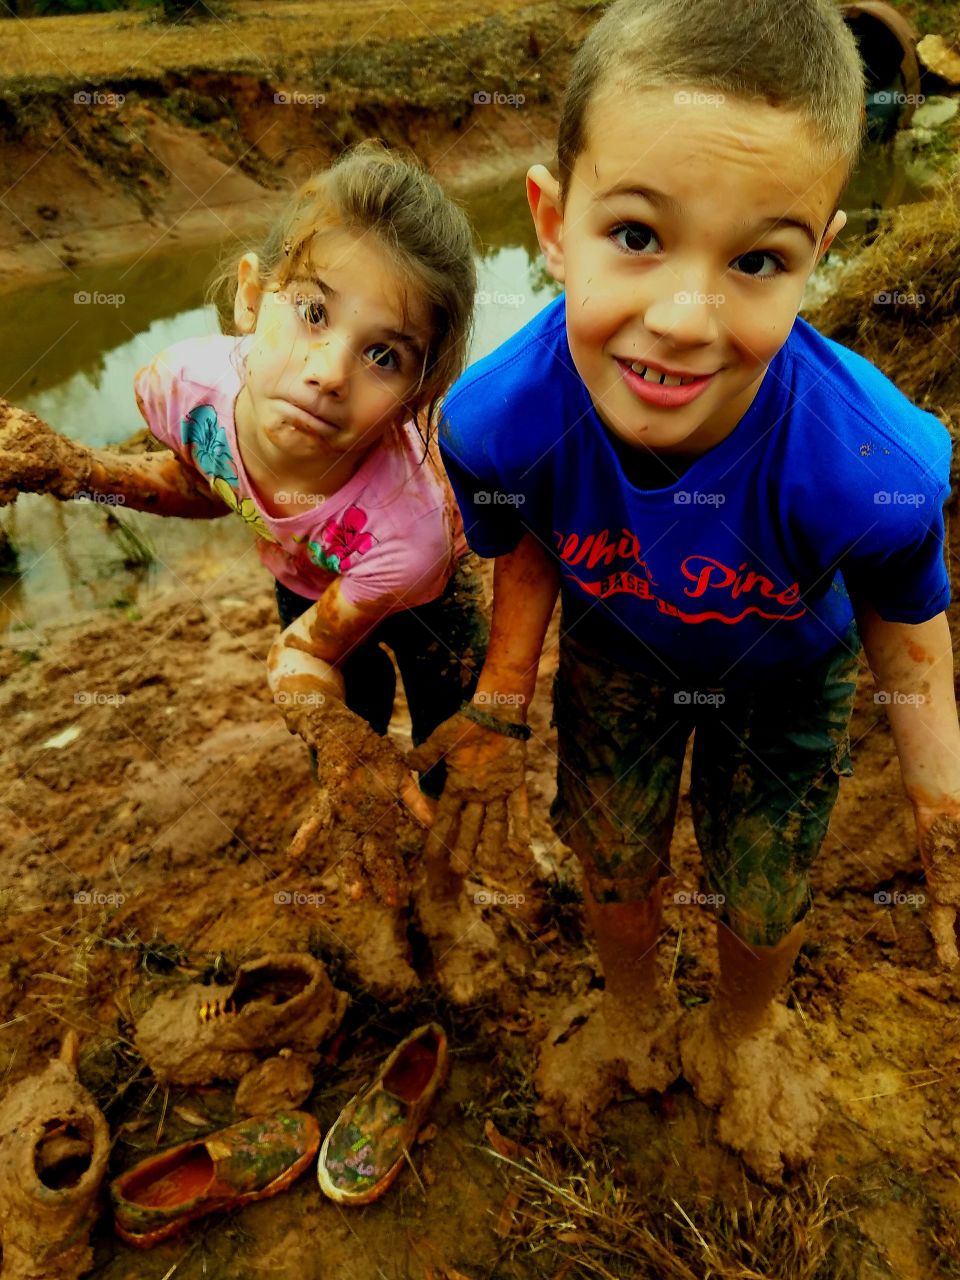 boy and girl after playing in the mud in Vidor Texas United States of America January 2018